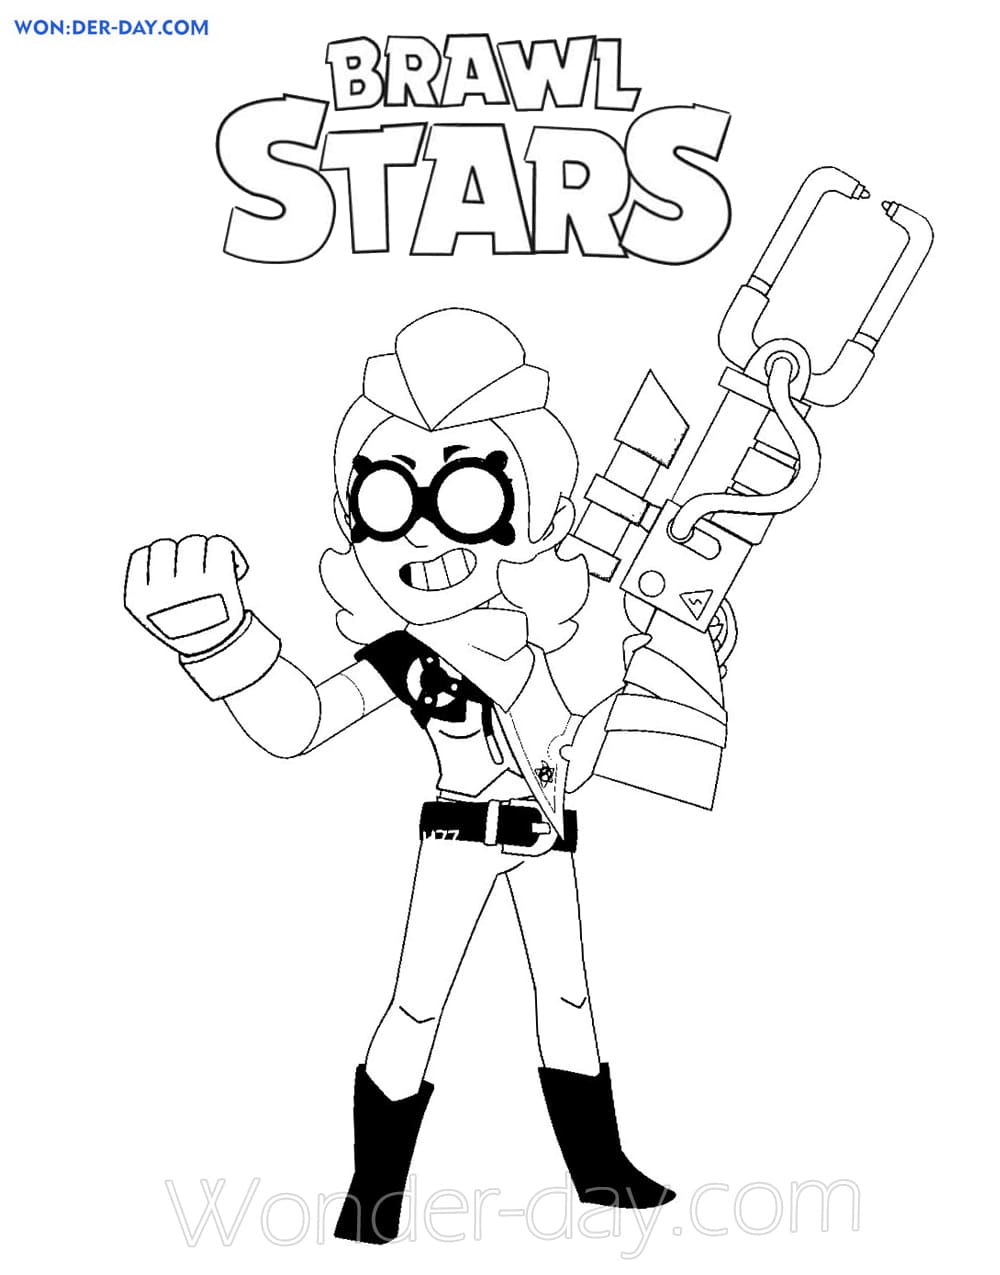 Belle Brawl Stars Coloring Pages Wonder Day Coloring Pages For Children And Adults - tekening brawl stars belle